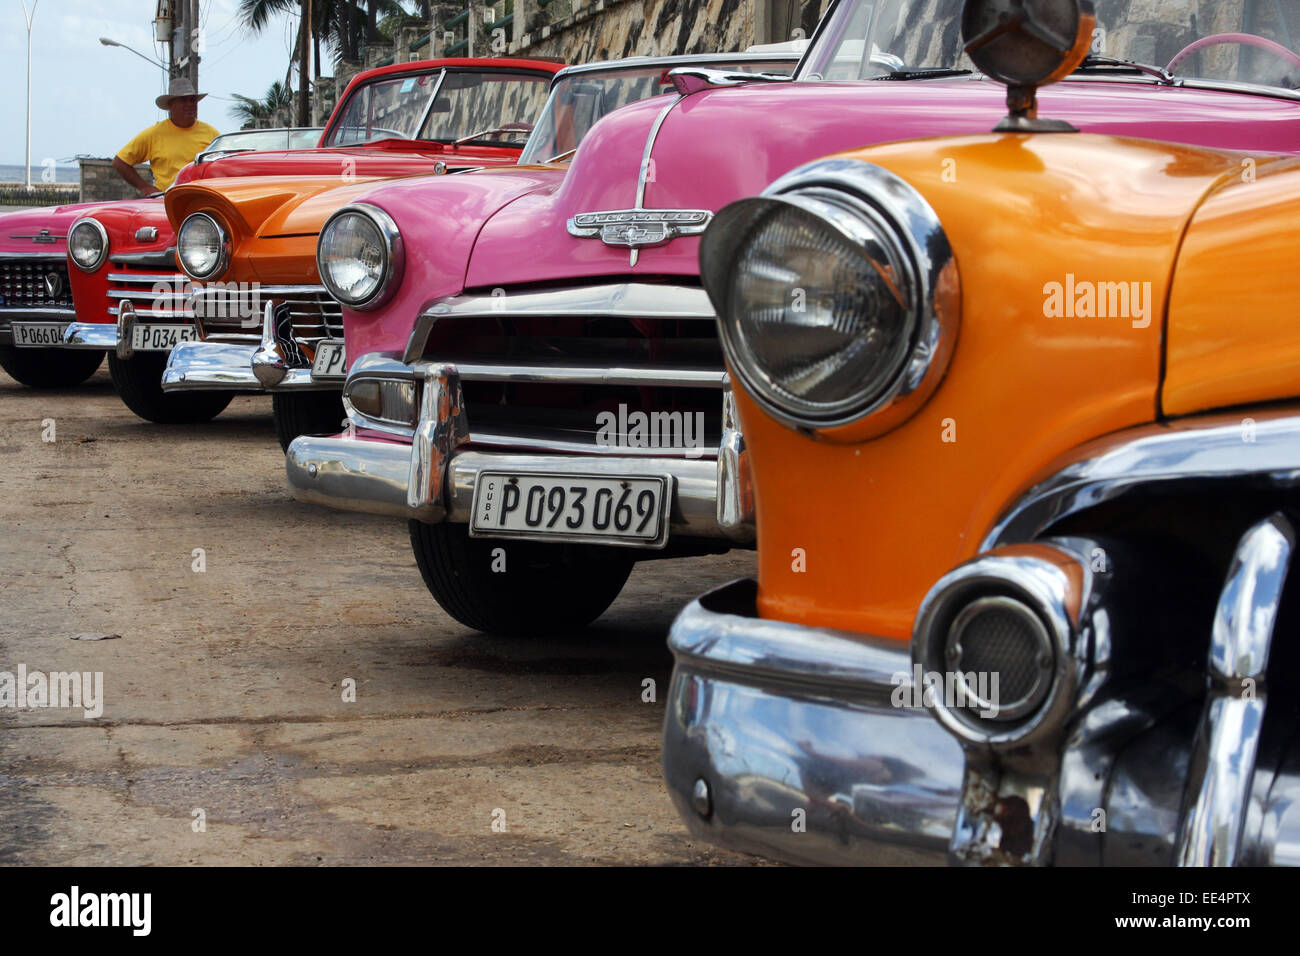 Vintage convertible classic cars parked in Havana in Cuba Stock Photo